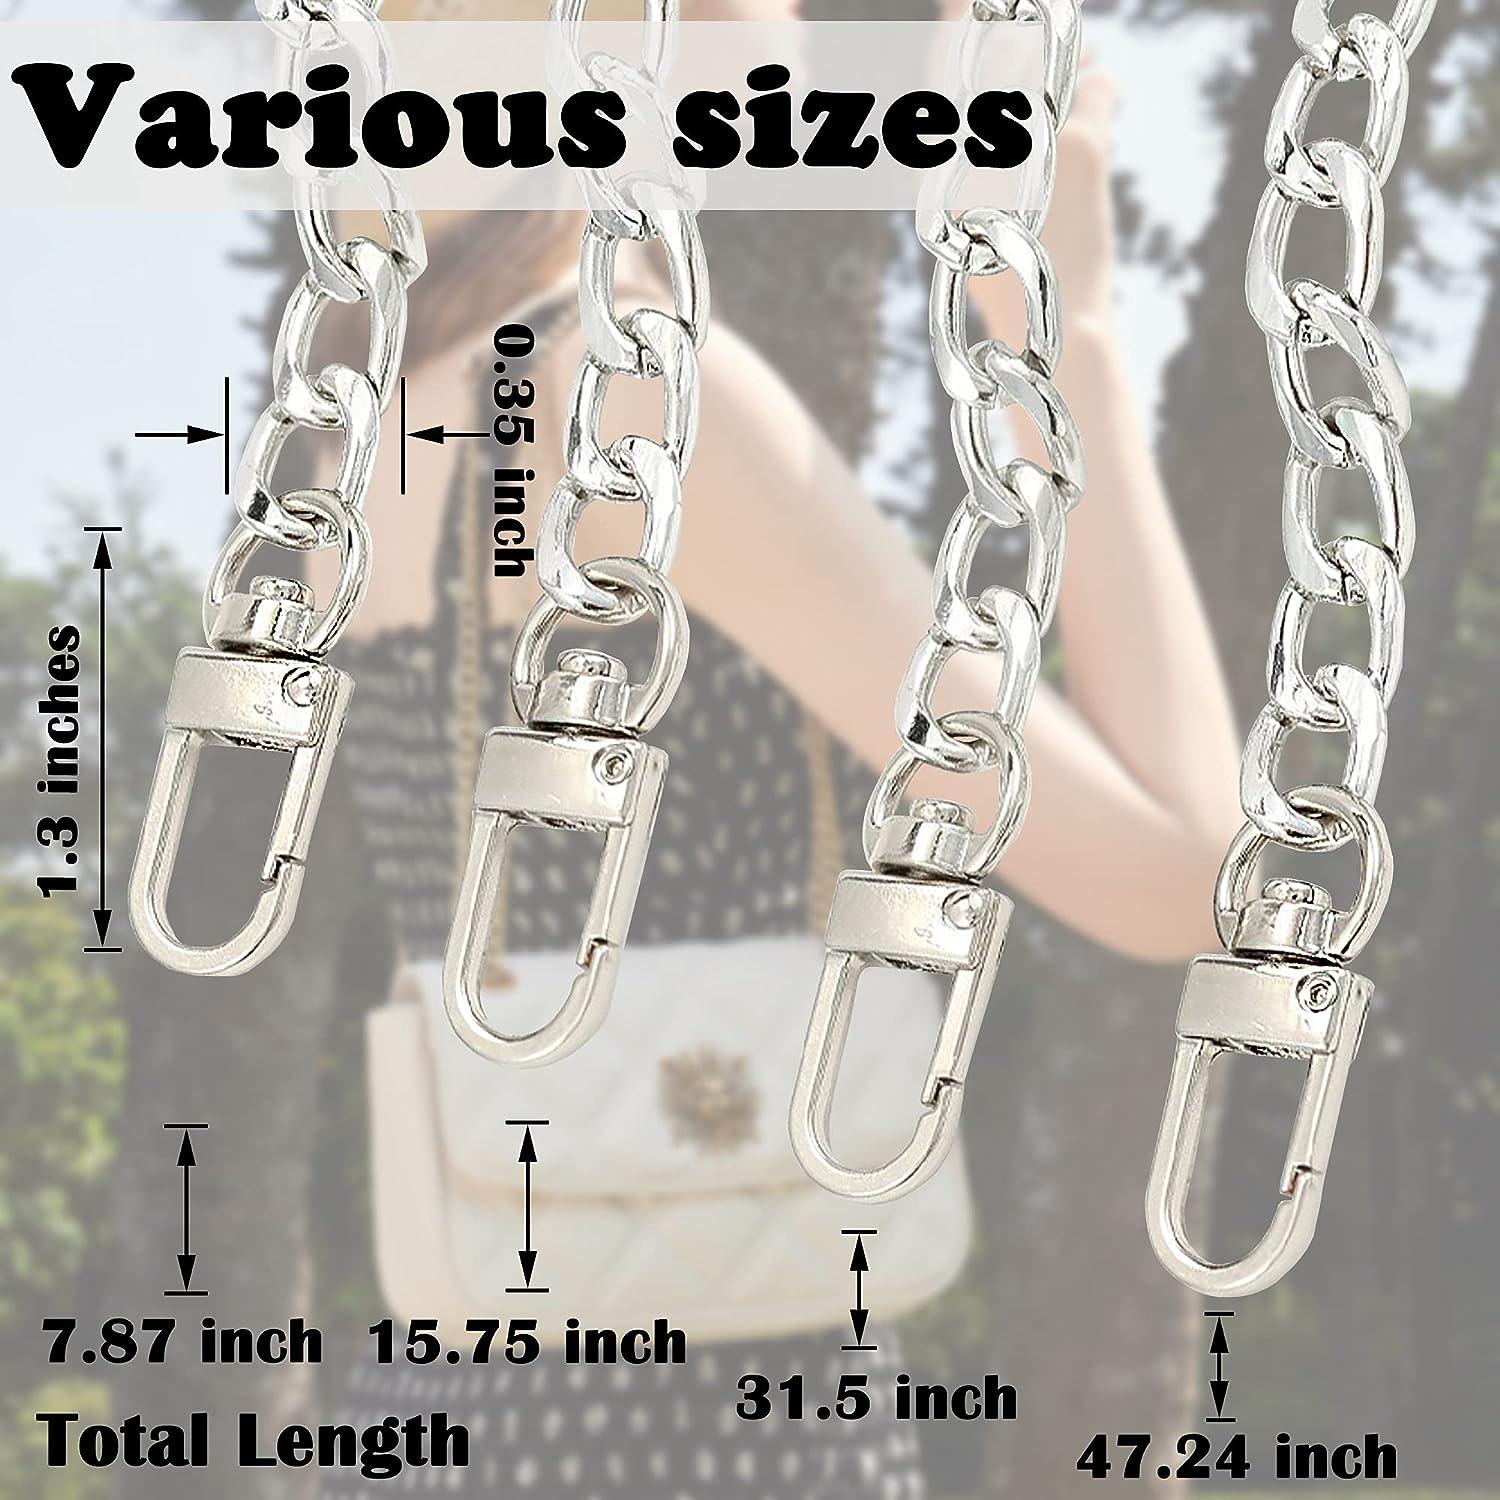  Anvin 47'' Flat Chain Strap DIY Iron Handbag Chains Replacement Purse  Straps Shoulder Crossbody Wallet Chain with Metal Buckles for Belt Bag  Clutch Pouch(Sturdy with Big Chain Links Weight Only 135g) 